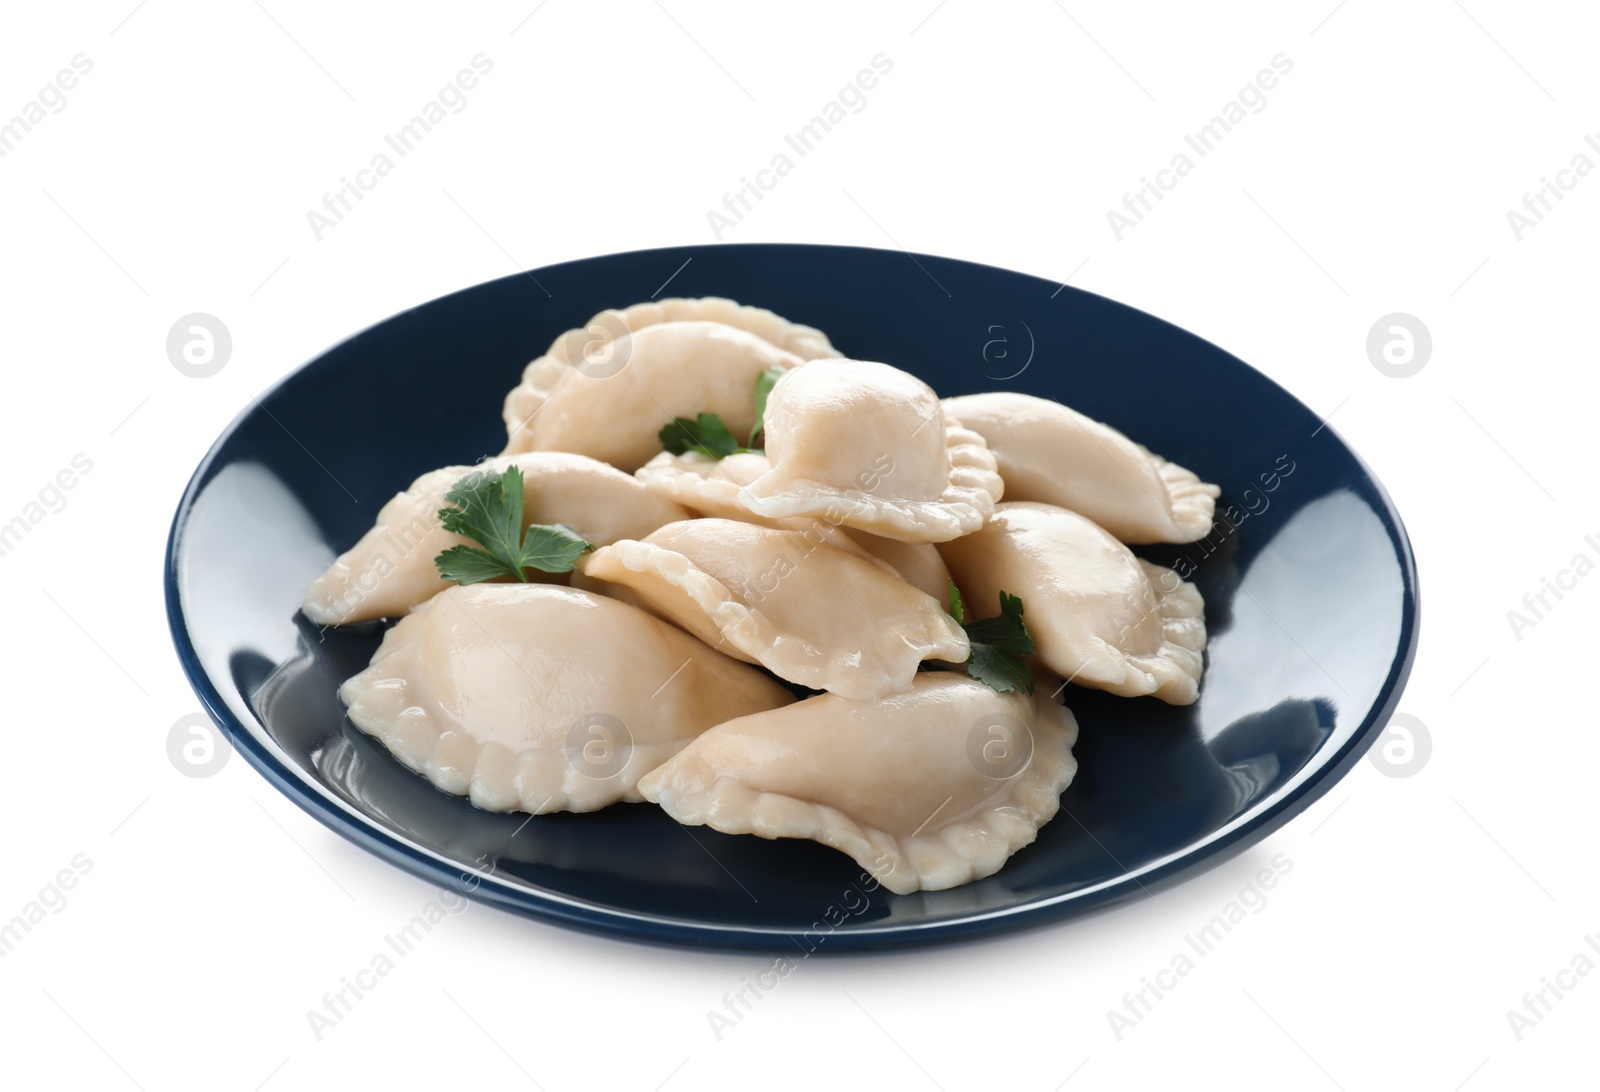 Photo of Plate of tasty dumplings served with parsley on white background